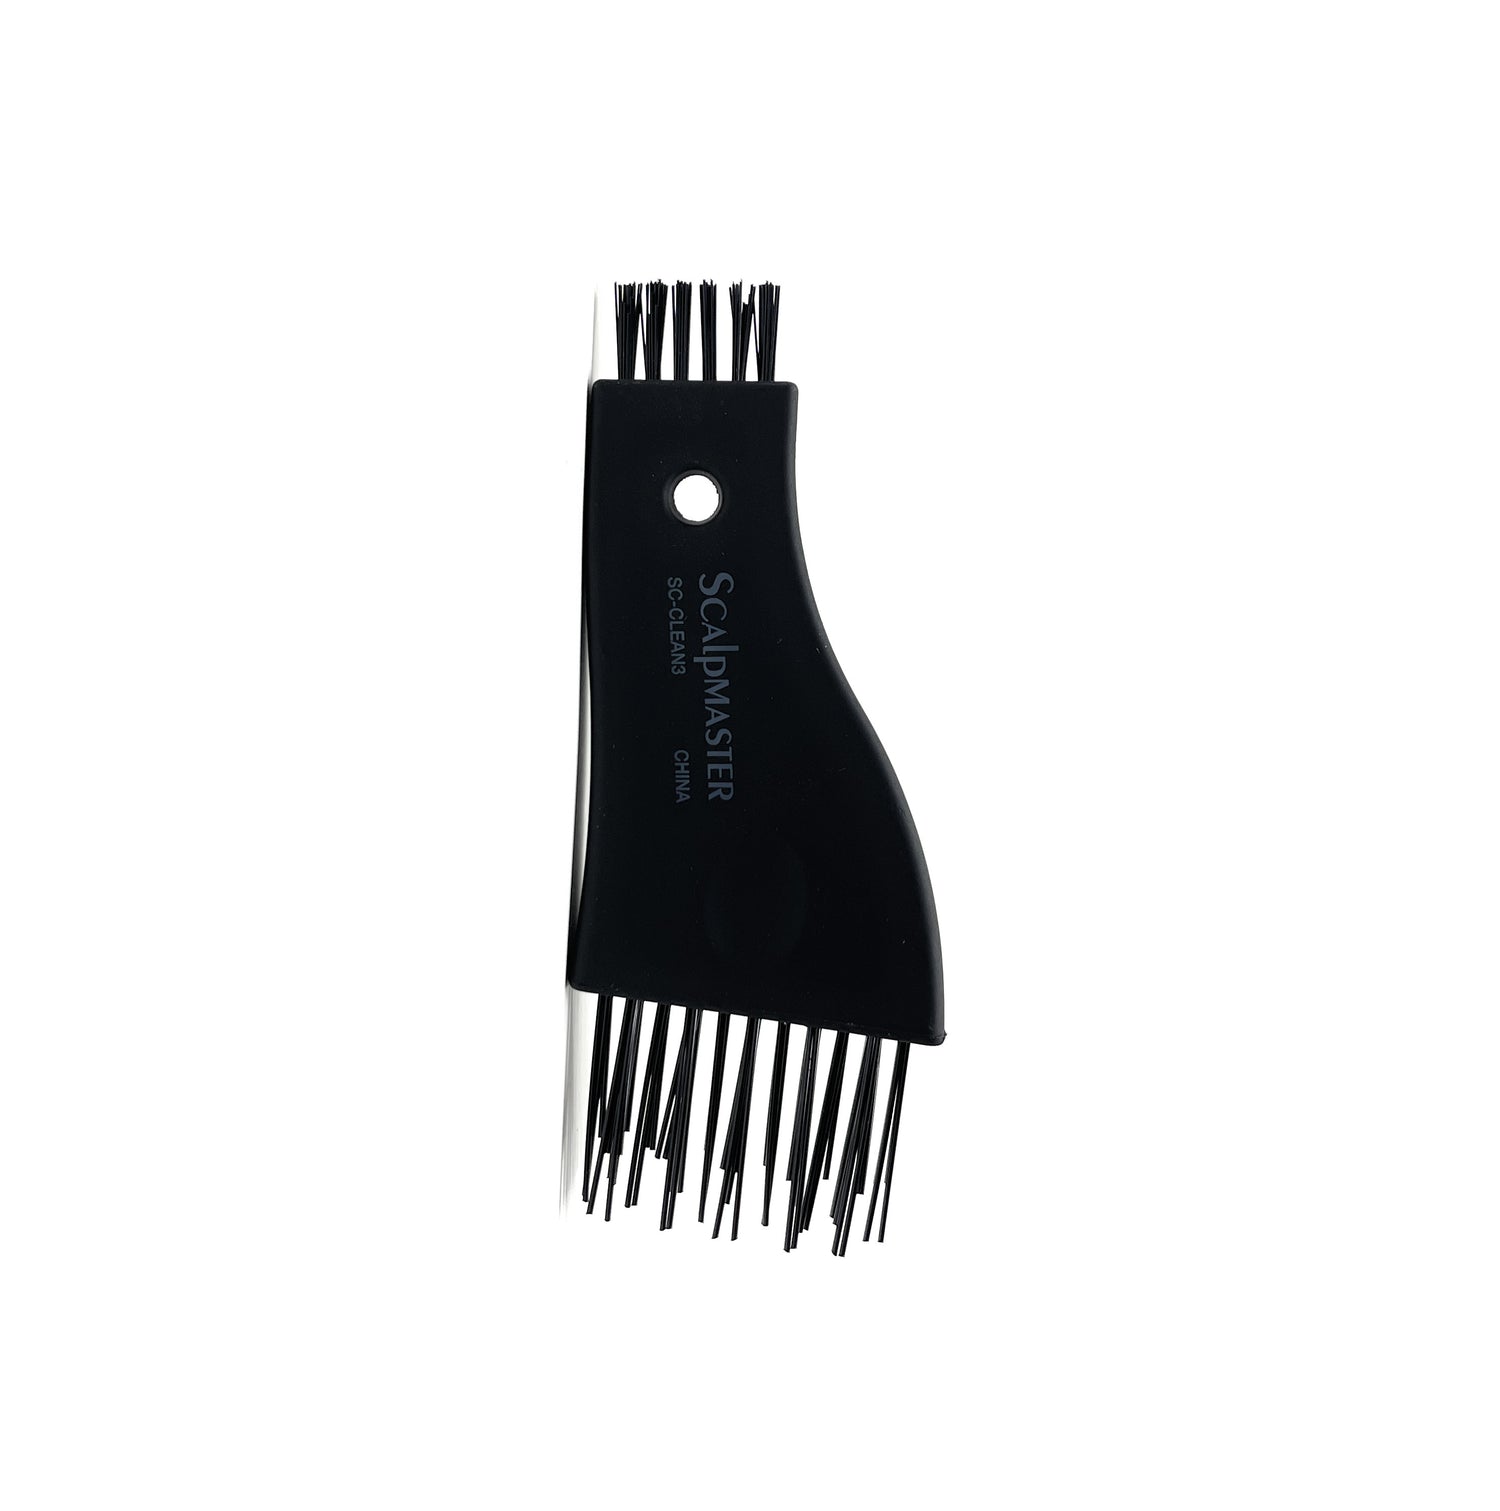 Cleaning Comb Brush Hair Cleaner Tool Hairbrush 2 In 1 Embedded